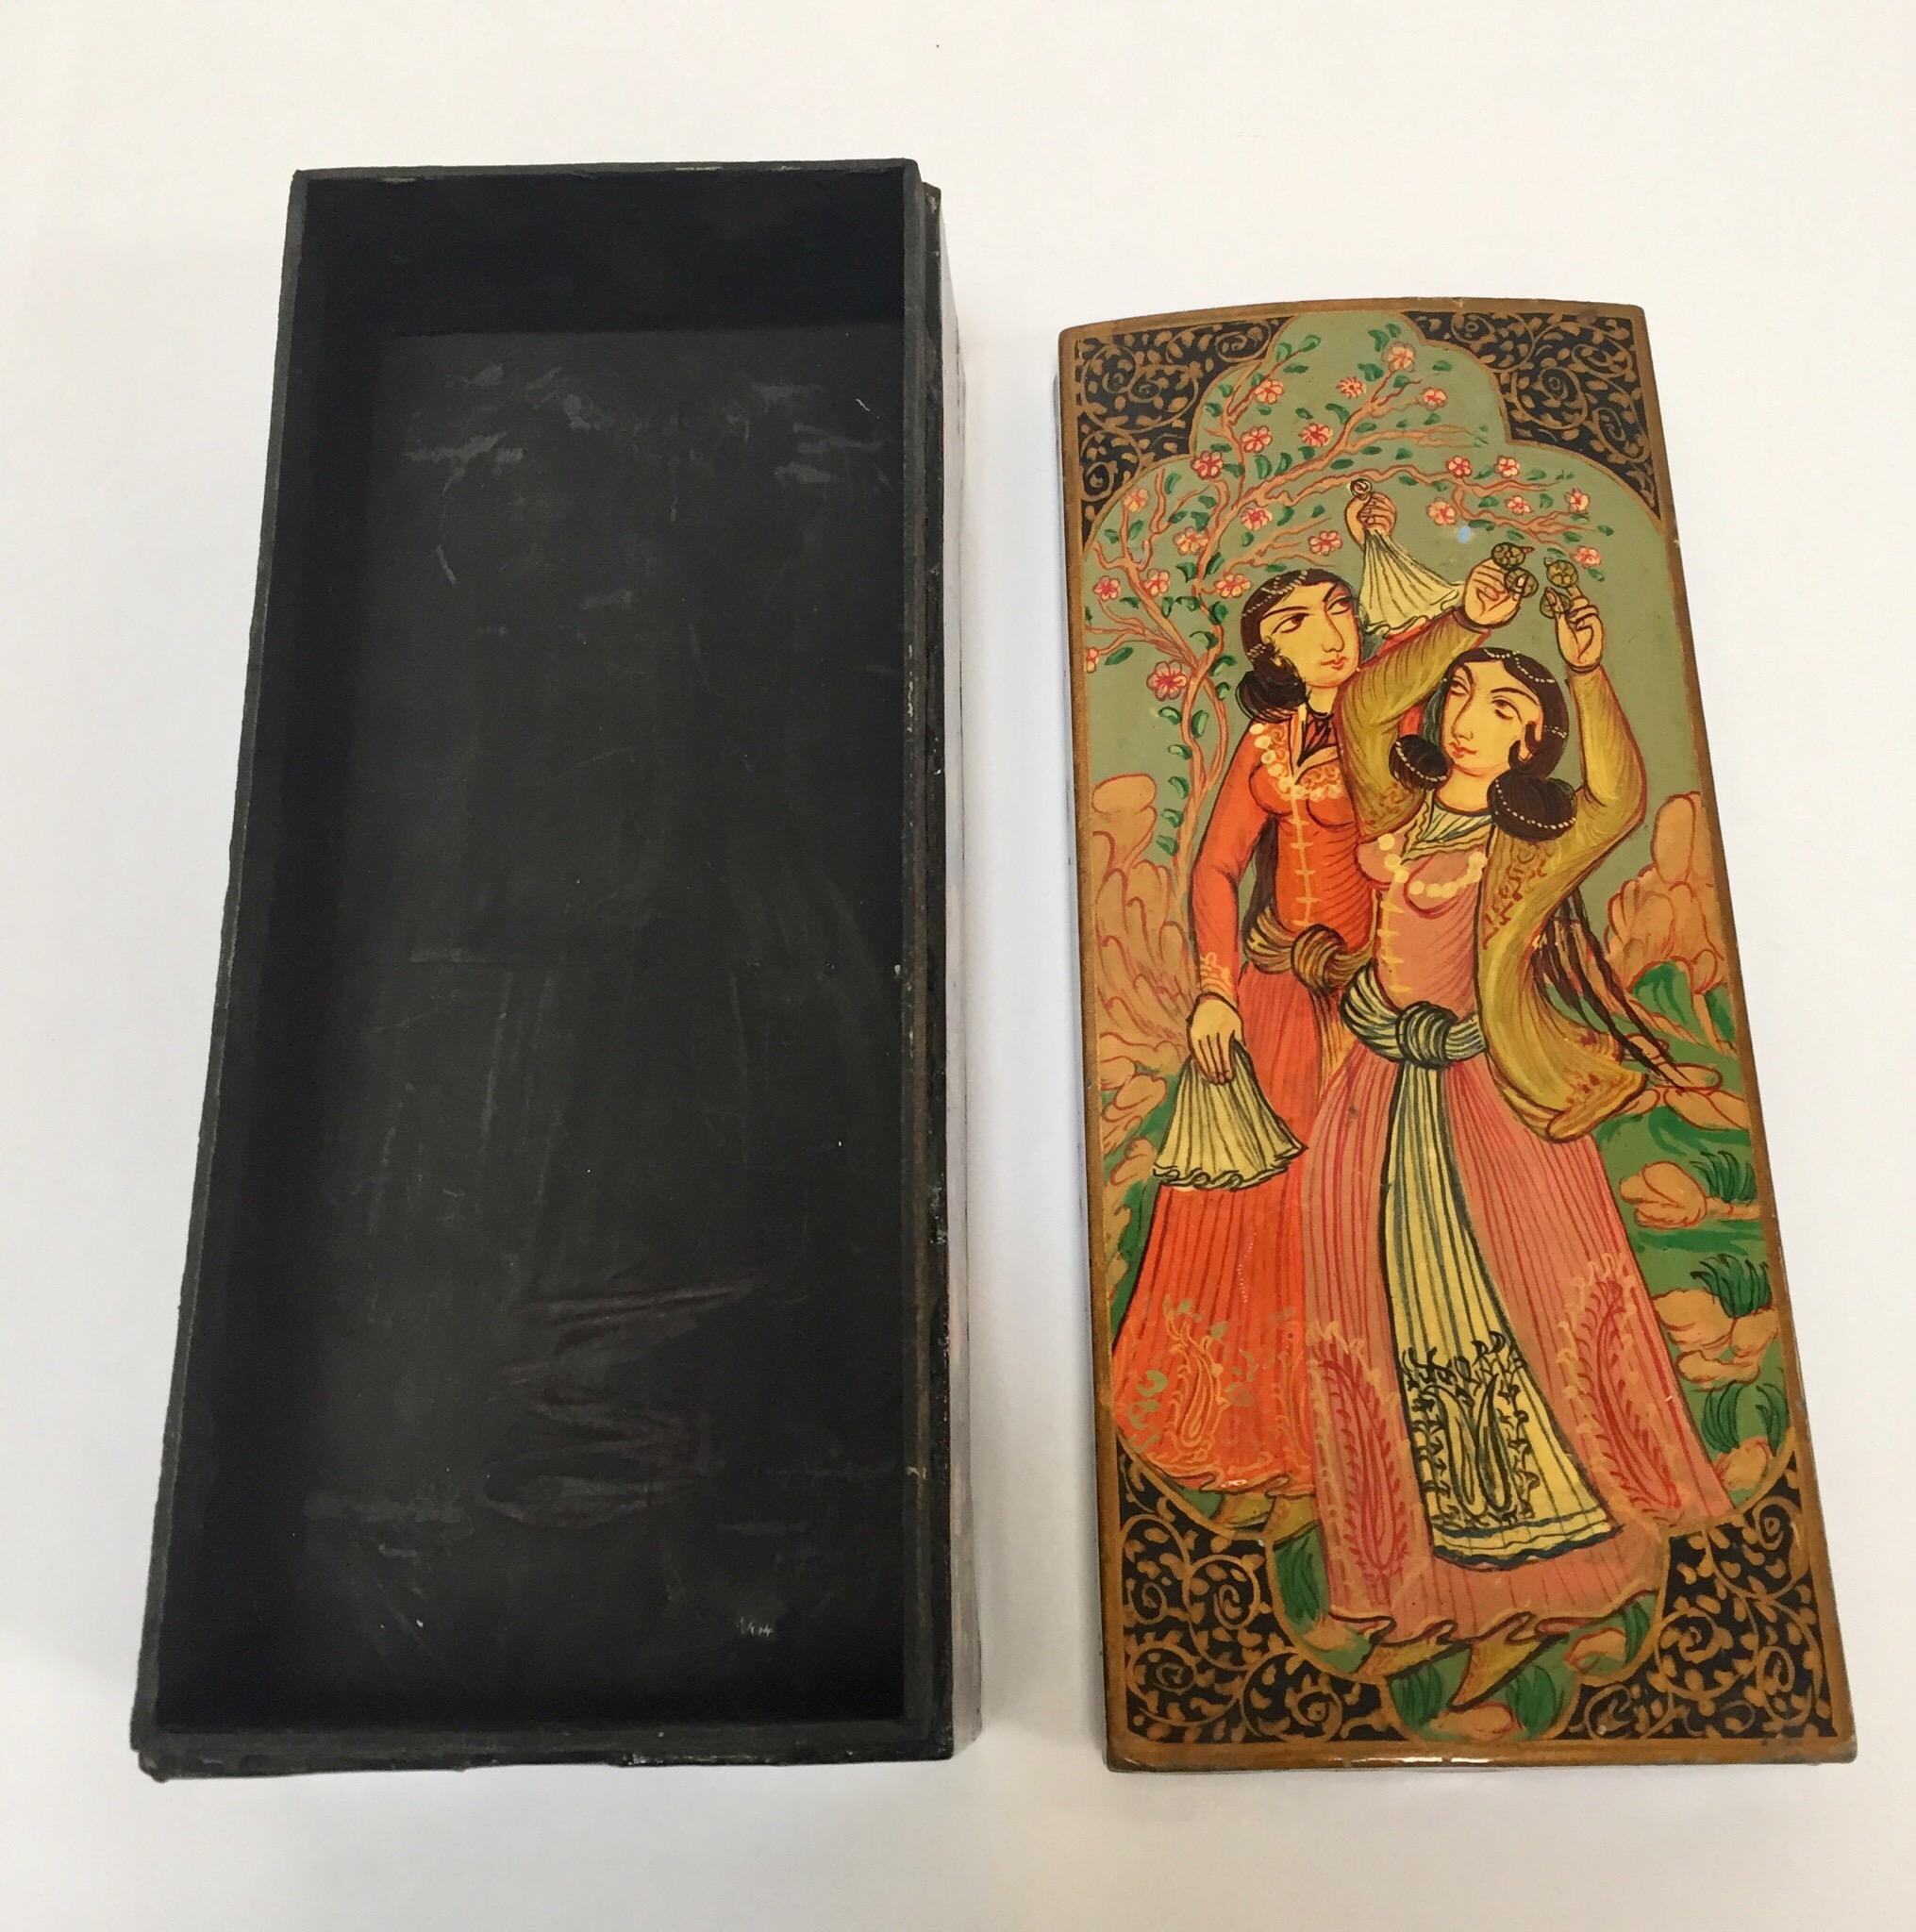 Hand-Crafted Lacquer Pen Box Hand Painted with Harem Girls Playing and Dancing